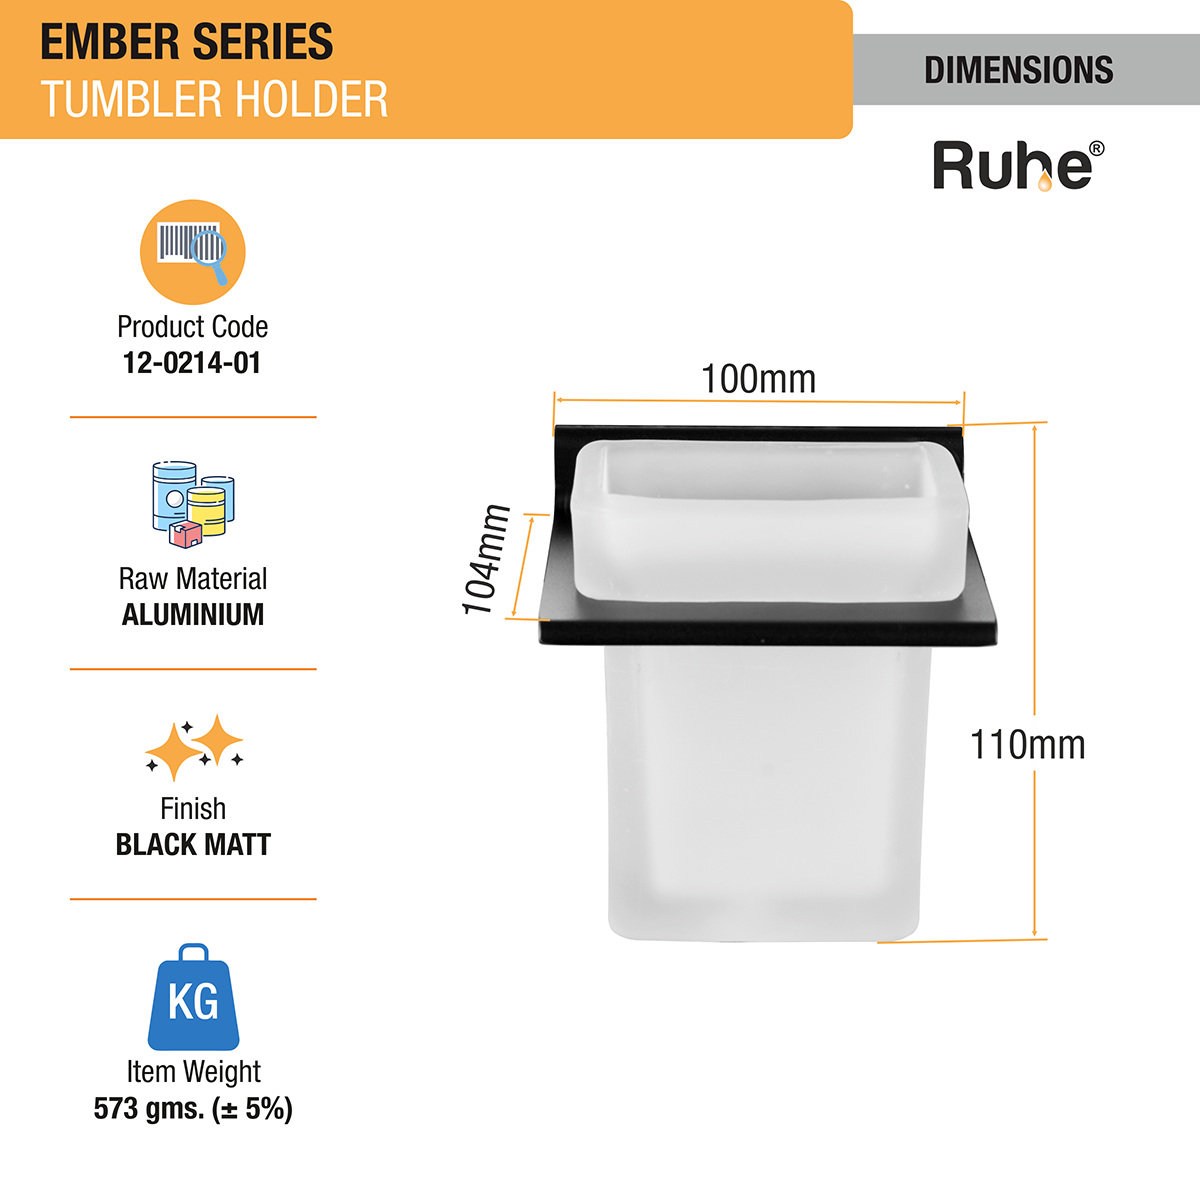 Ember Tumbler Holder (Space Aluminium) dimensions and sizes